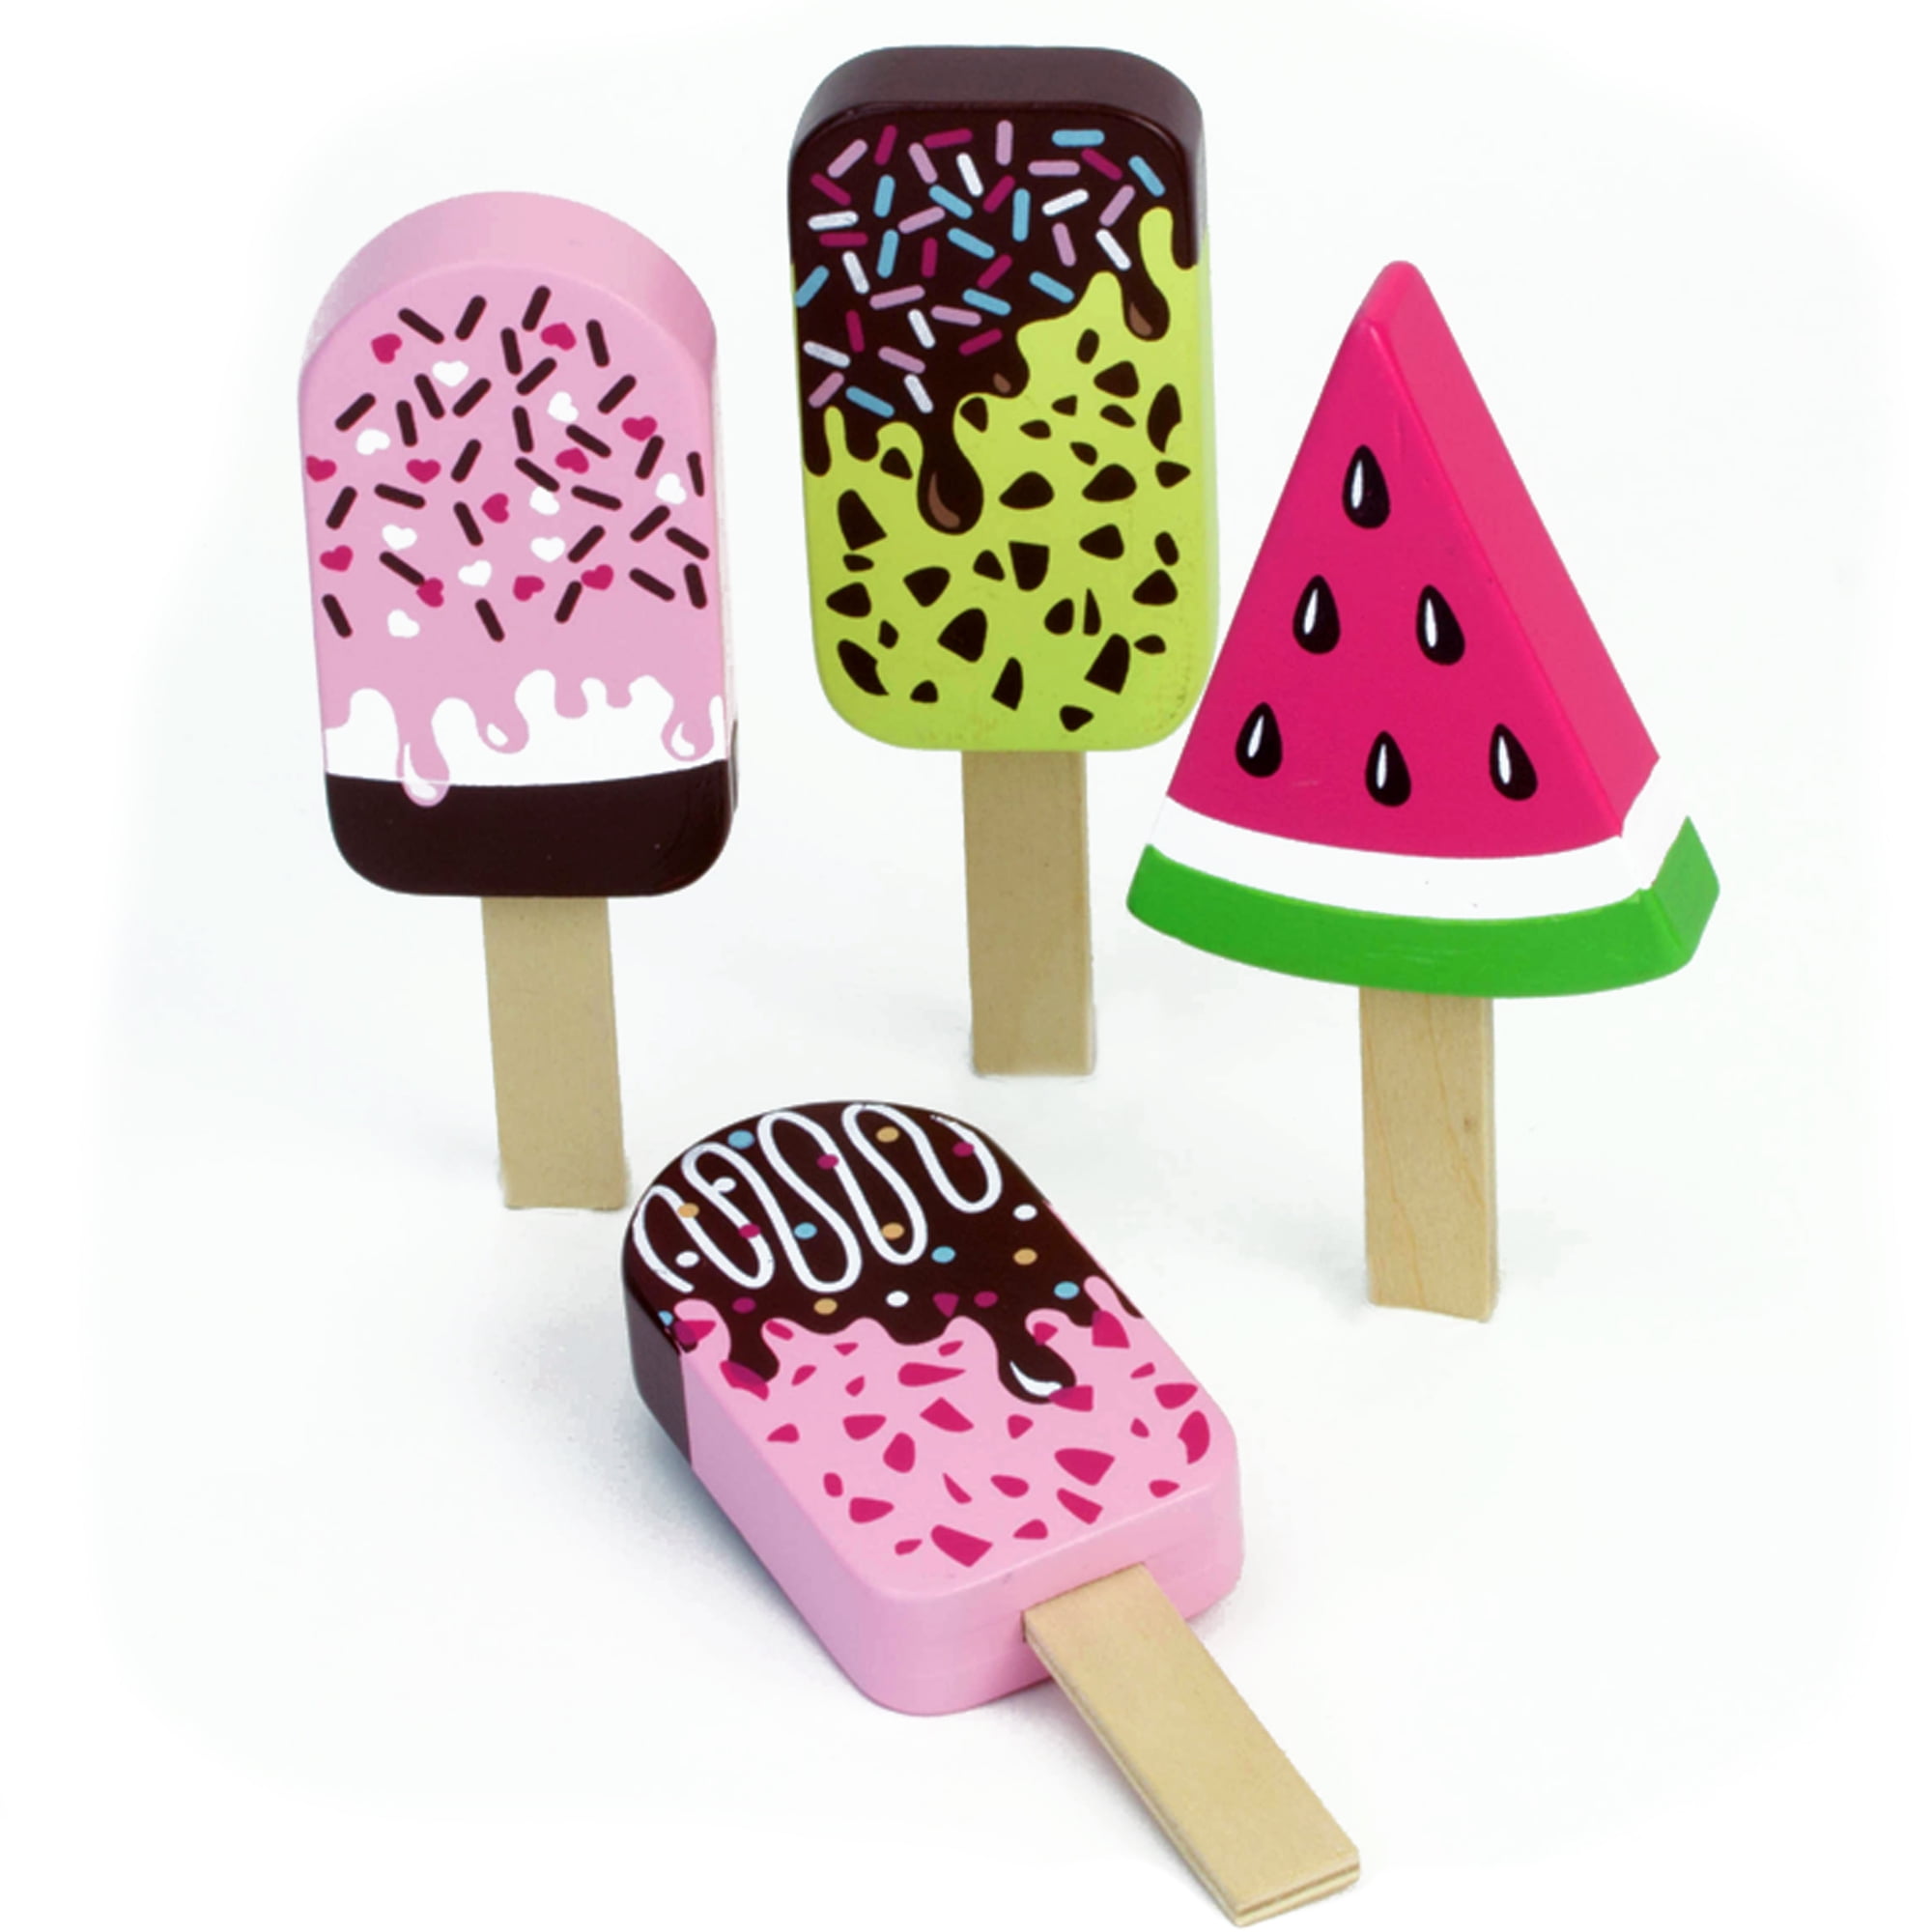 Shop Popsicle Sticks + Ice Cream Sticks at Bakers Party Shop